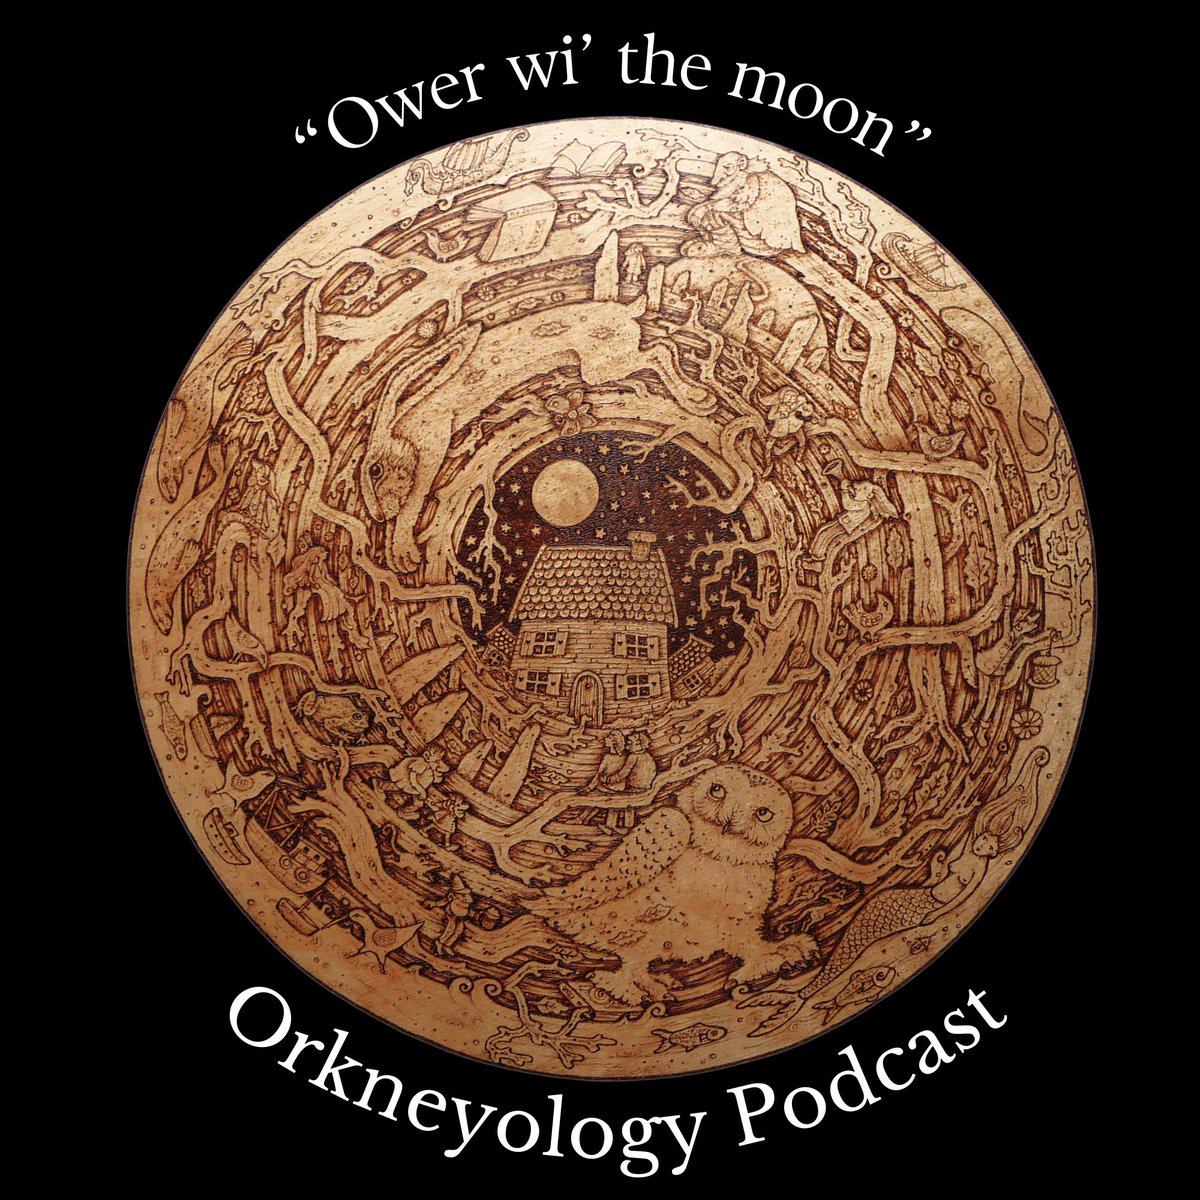 It's a full moon, and time for the Orkneyology Podcast!Among our folkloric musings tonight, we pose the burning question: 'Are you a bookworm or a bookdragon?' Listen on the website: orkneyology.com/orkneyology-po… Youtube: youtu.be/n8muFpEyHLE or Spotify: open.spotify.com/show/0CuYpxinh…